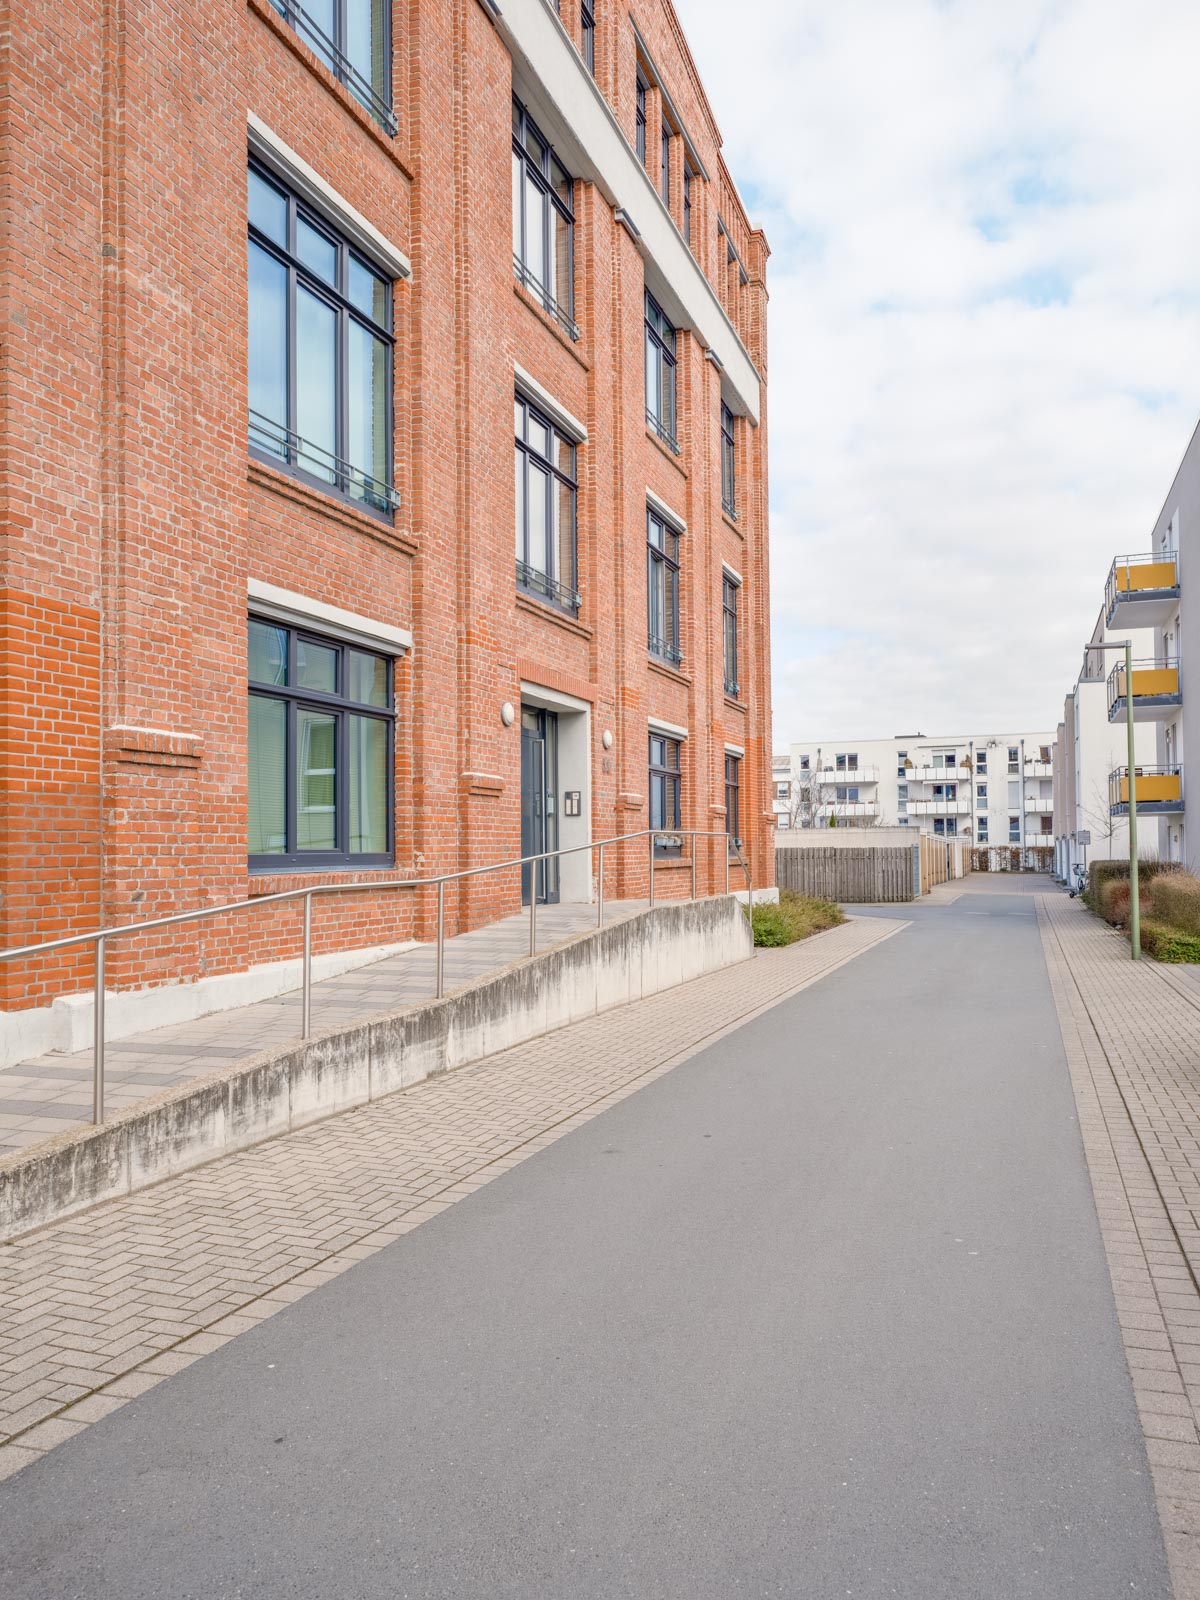 Side street in a newly built residential area in March 2021 (Bielefeld, Germany).